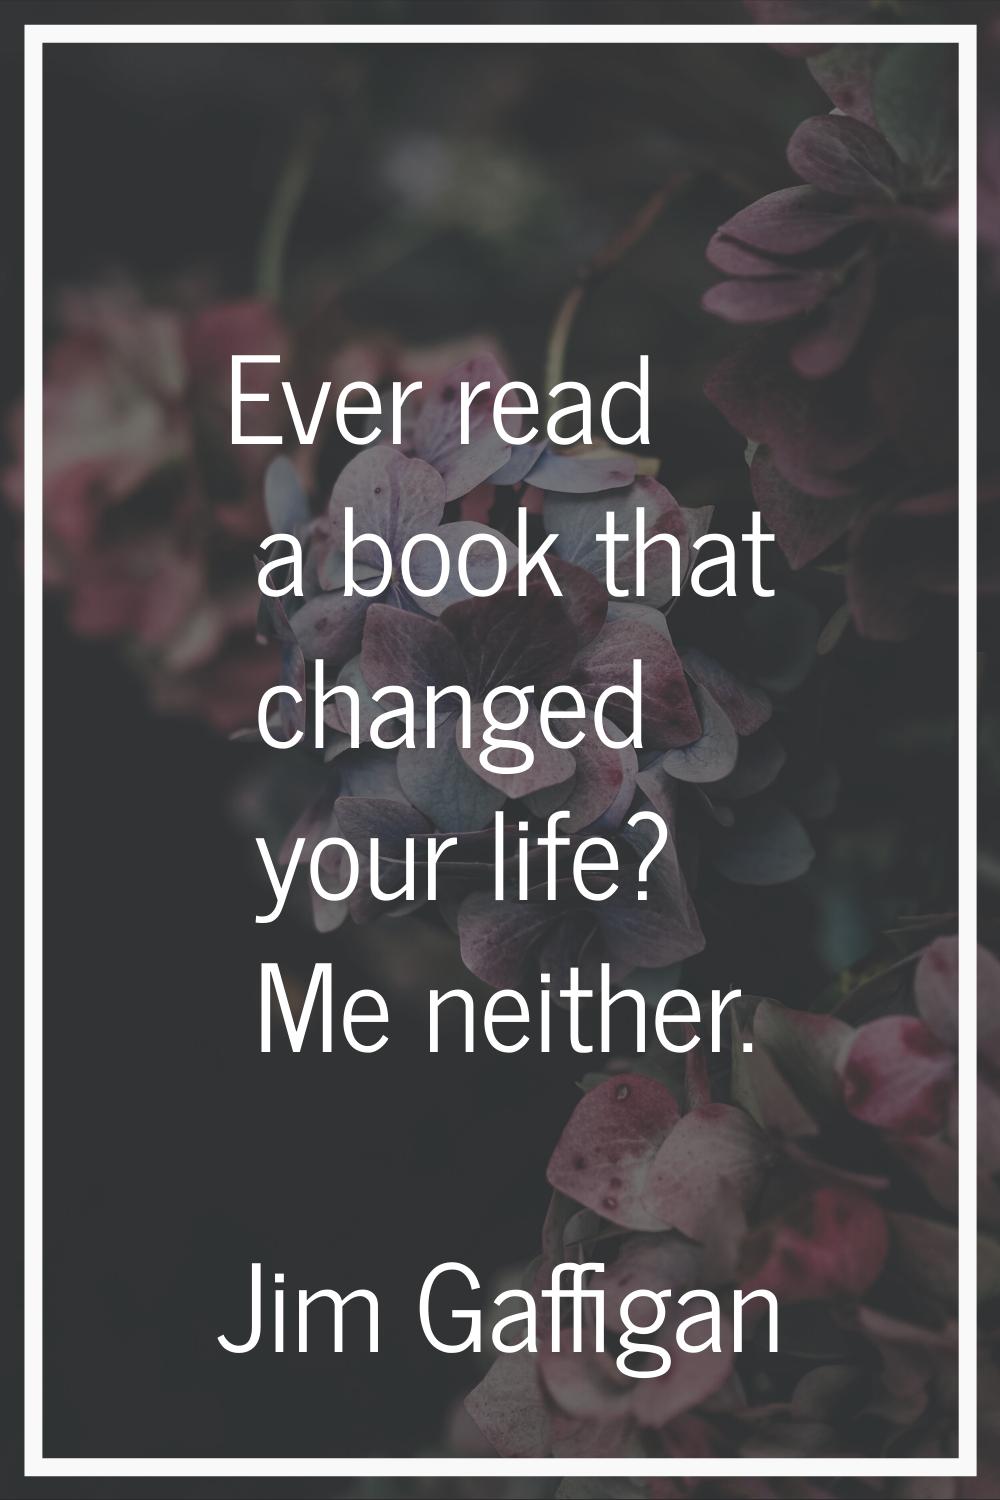 Ever read a book that changed your life? Me neither.